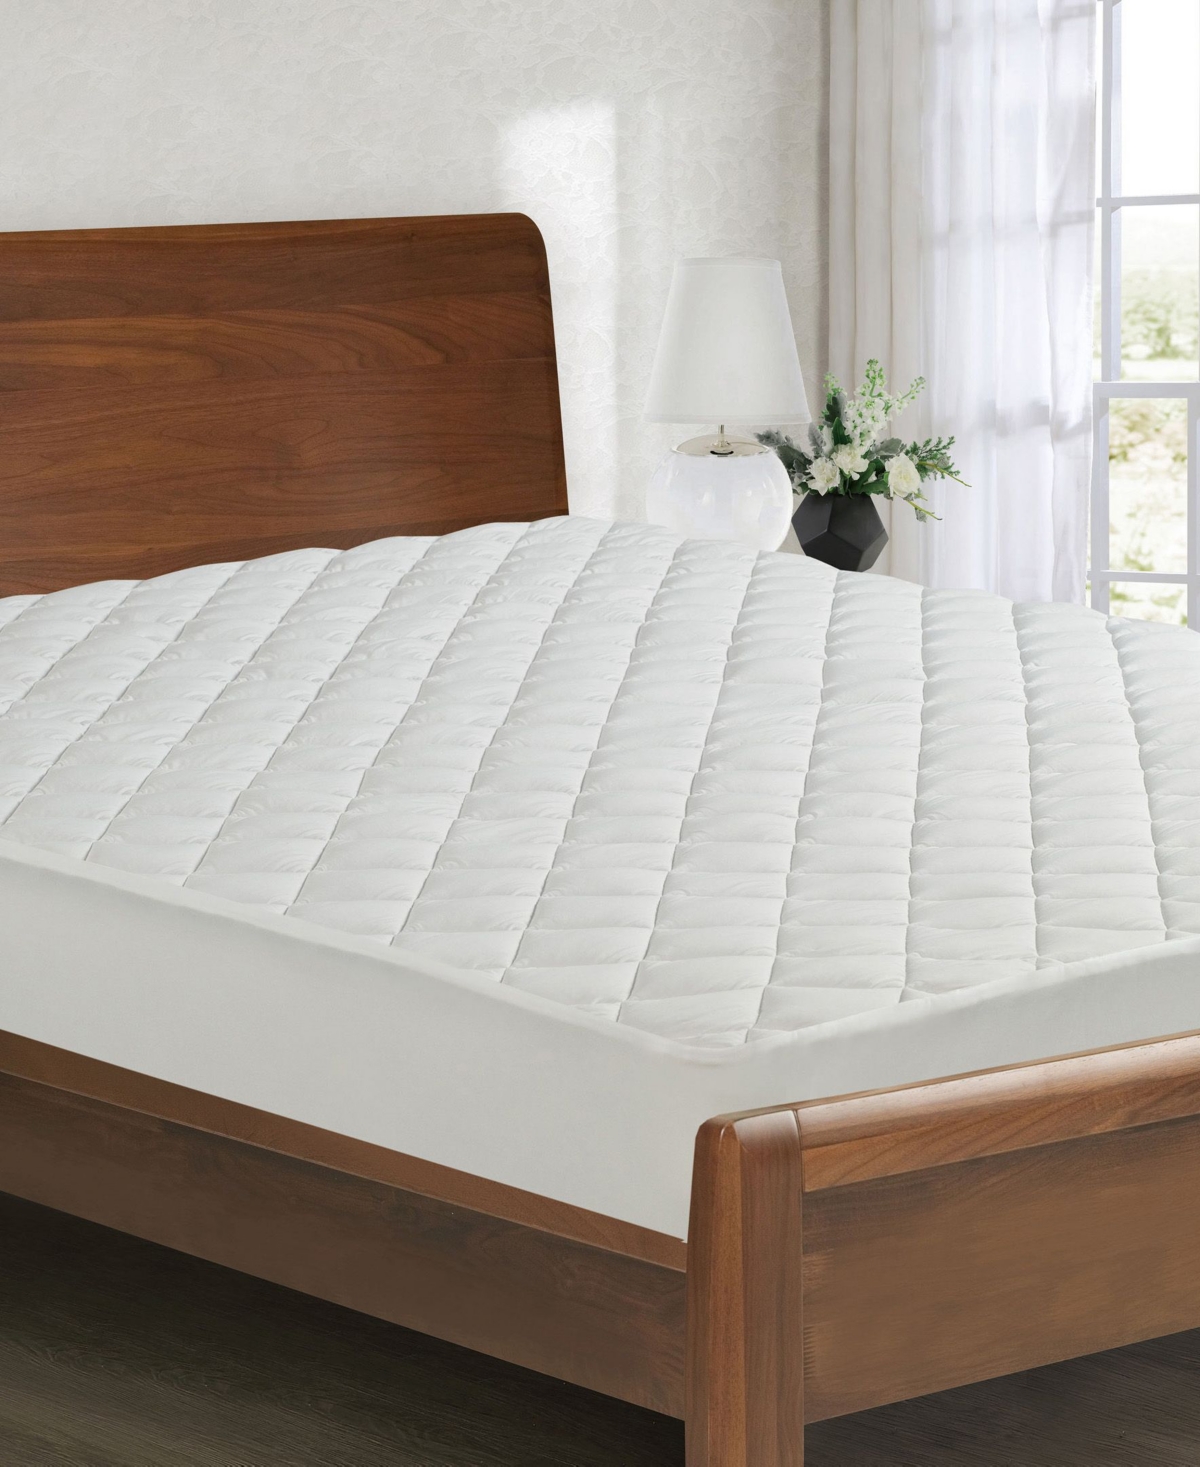 All-In-One Performance Stretch Moisture Wicking Fitted Mattress Pad, King